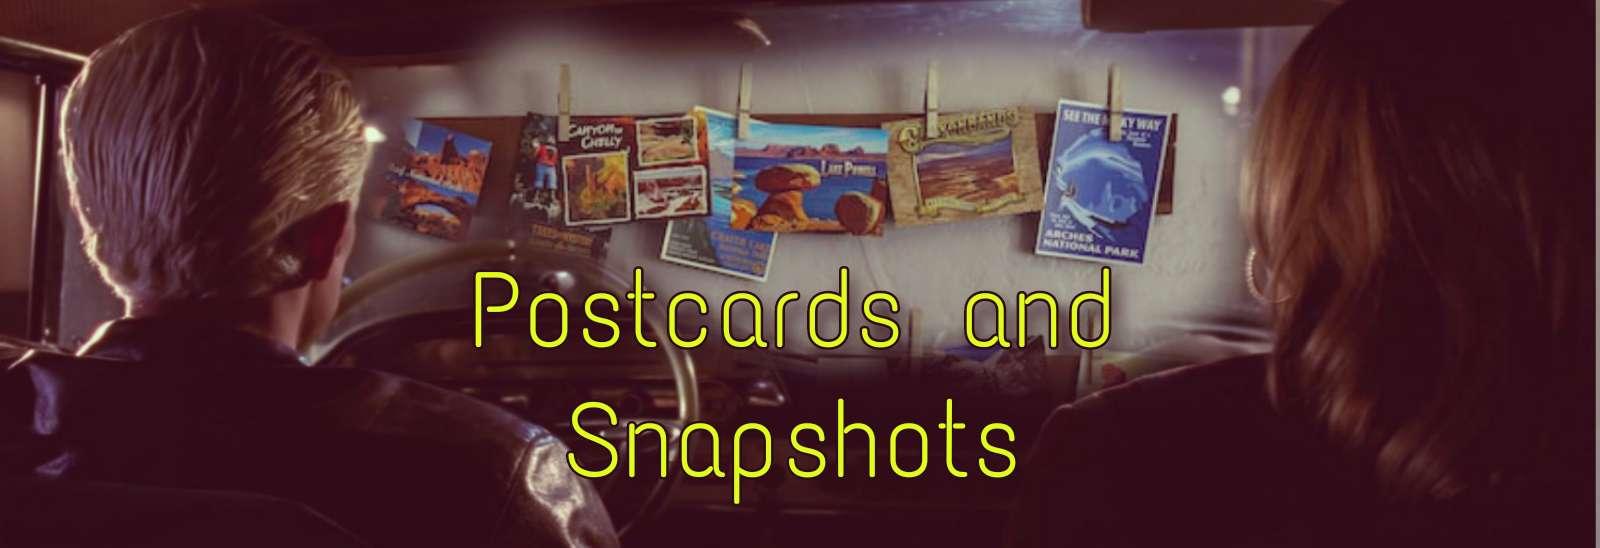 Postcards and Snapshots